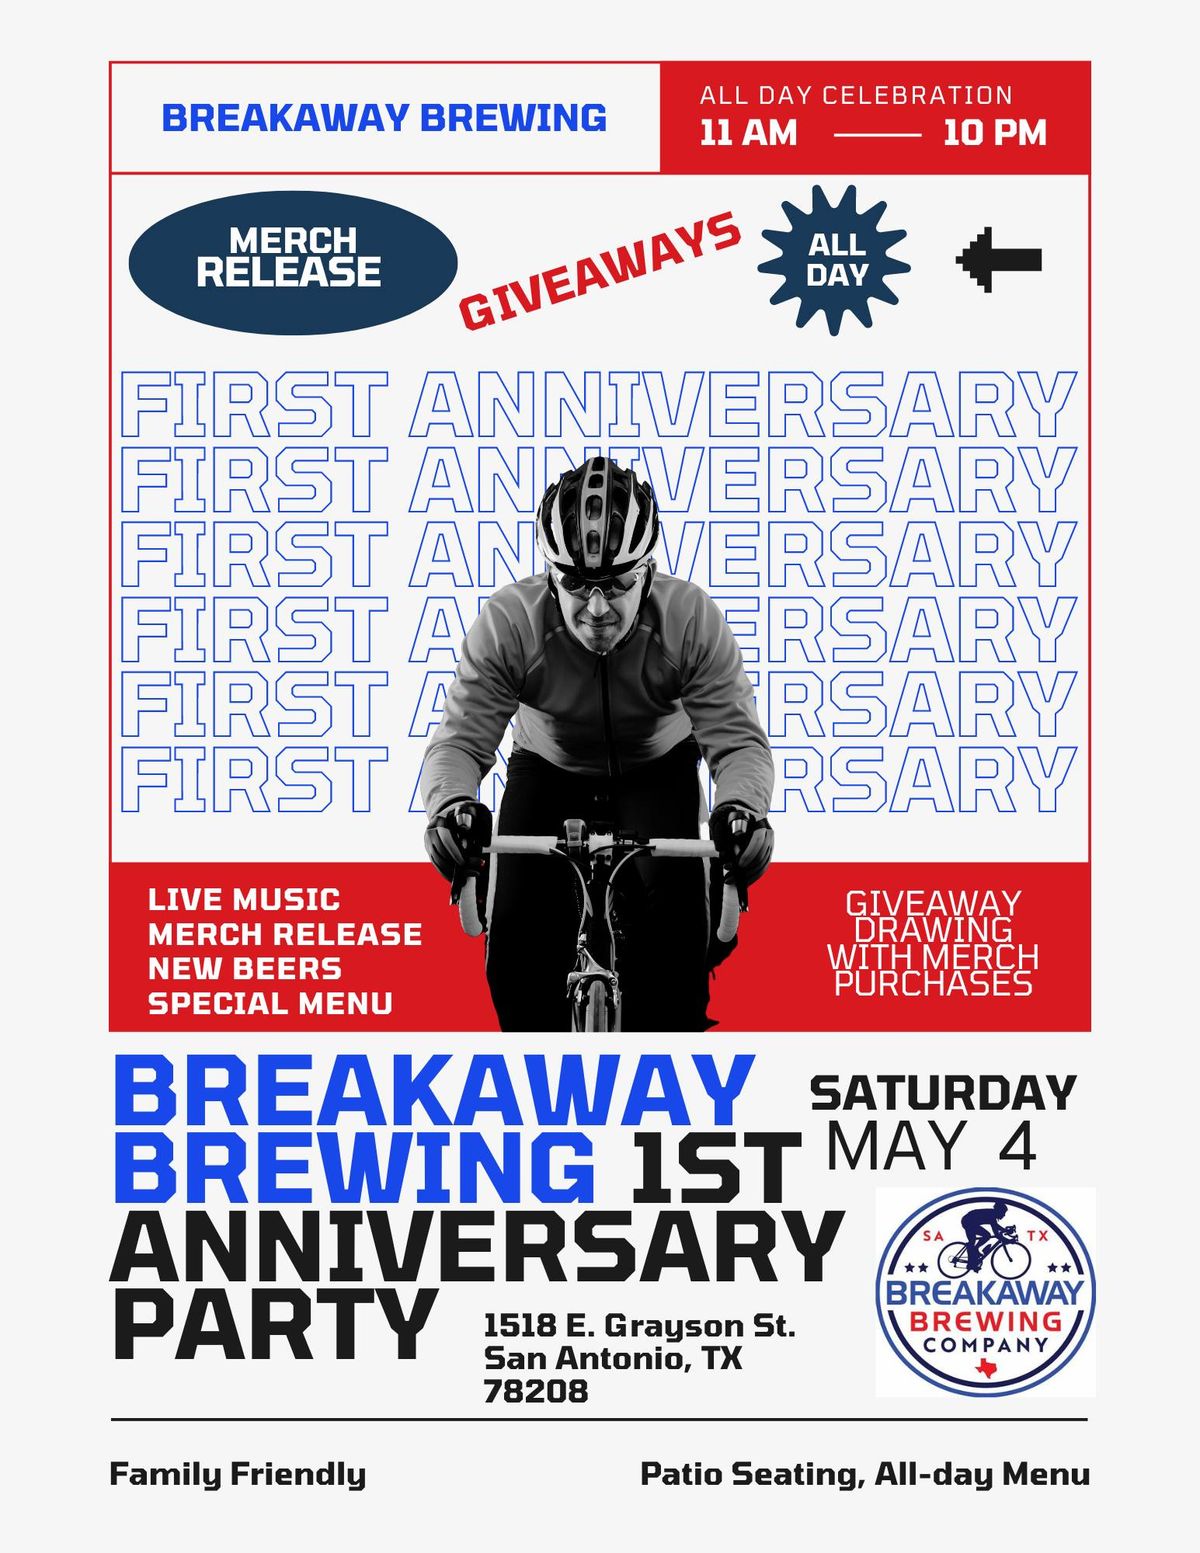 FIRST ANNIVERSARY PARTY - Breakaway Brewing Co.